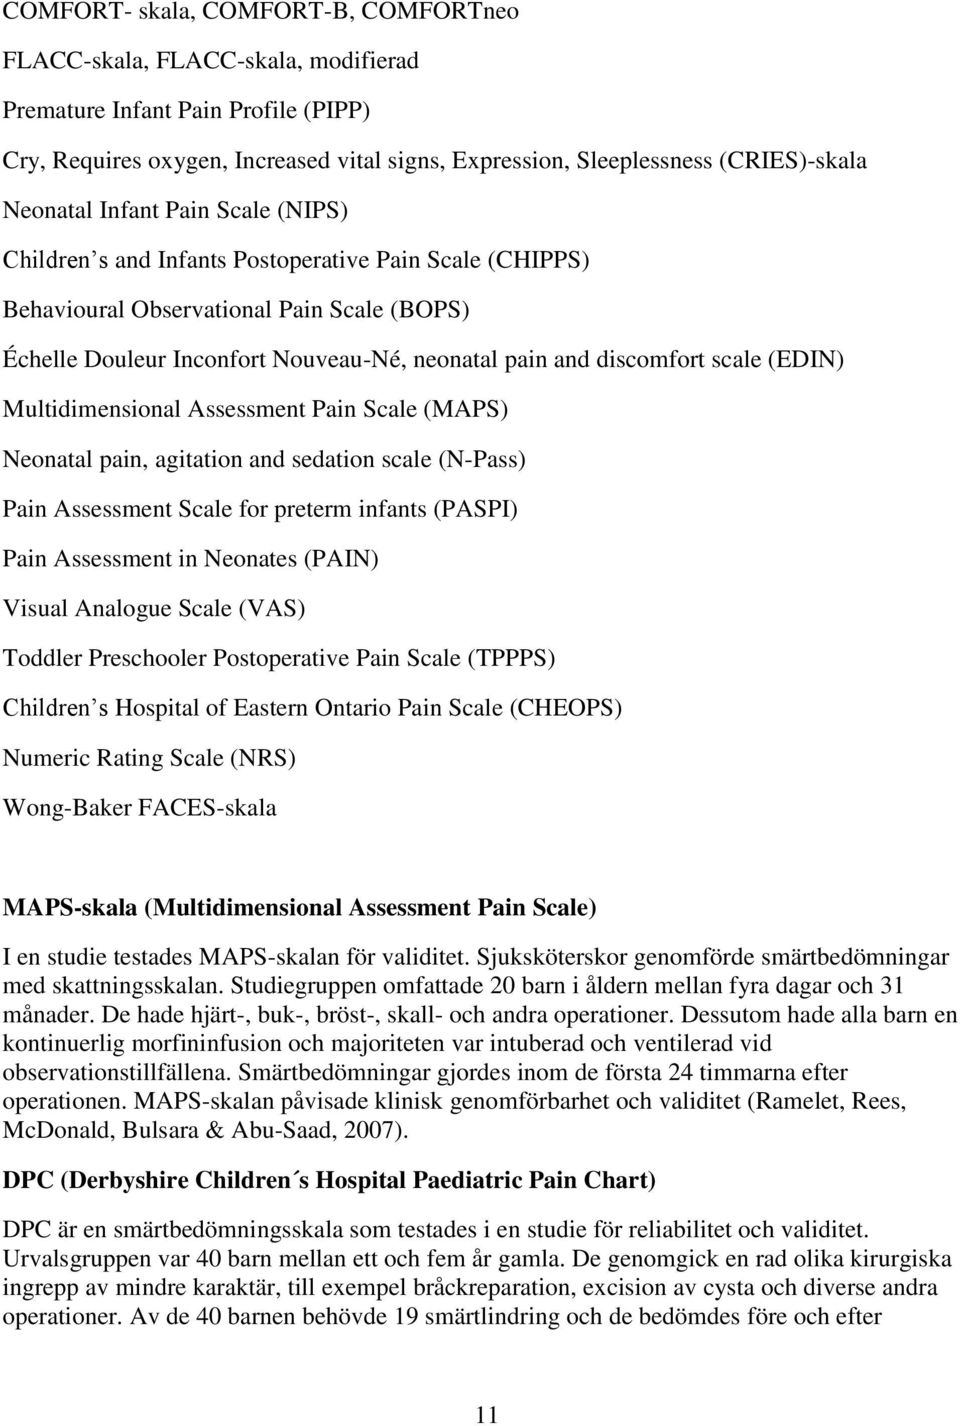 discomfort scale (EDIN) Multidimensional Assessment Pain Scale (MAPS) Neonatal pain, agitation and sedation scale (N-Pass) Pain Assessment Scale for preterm infants (PASPI) Pain Assessment in